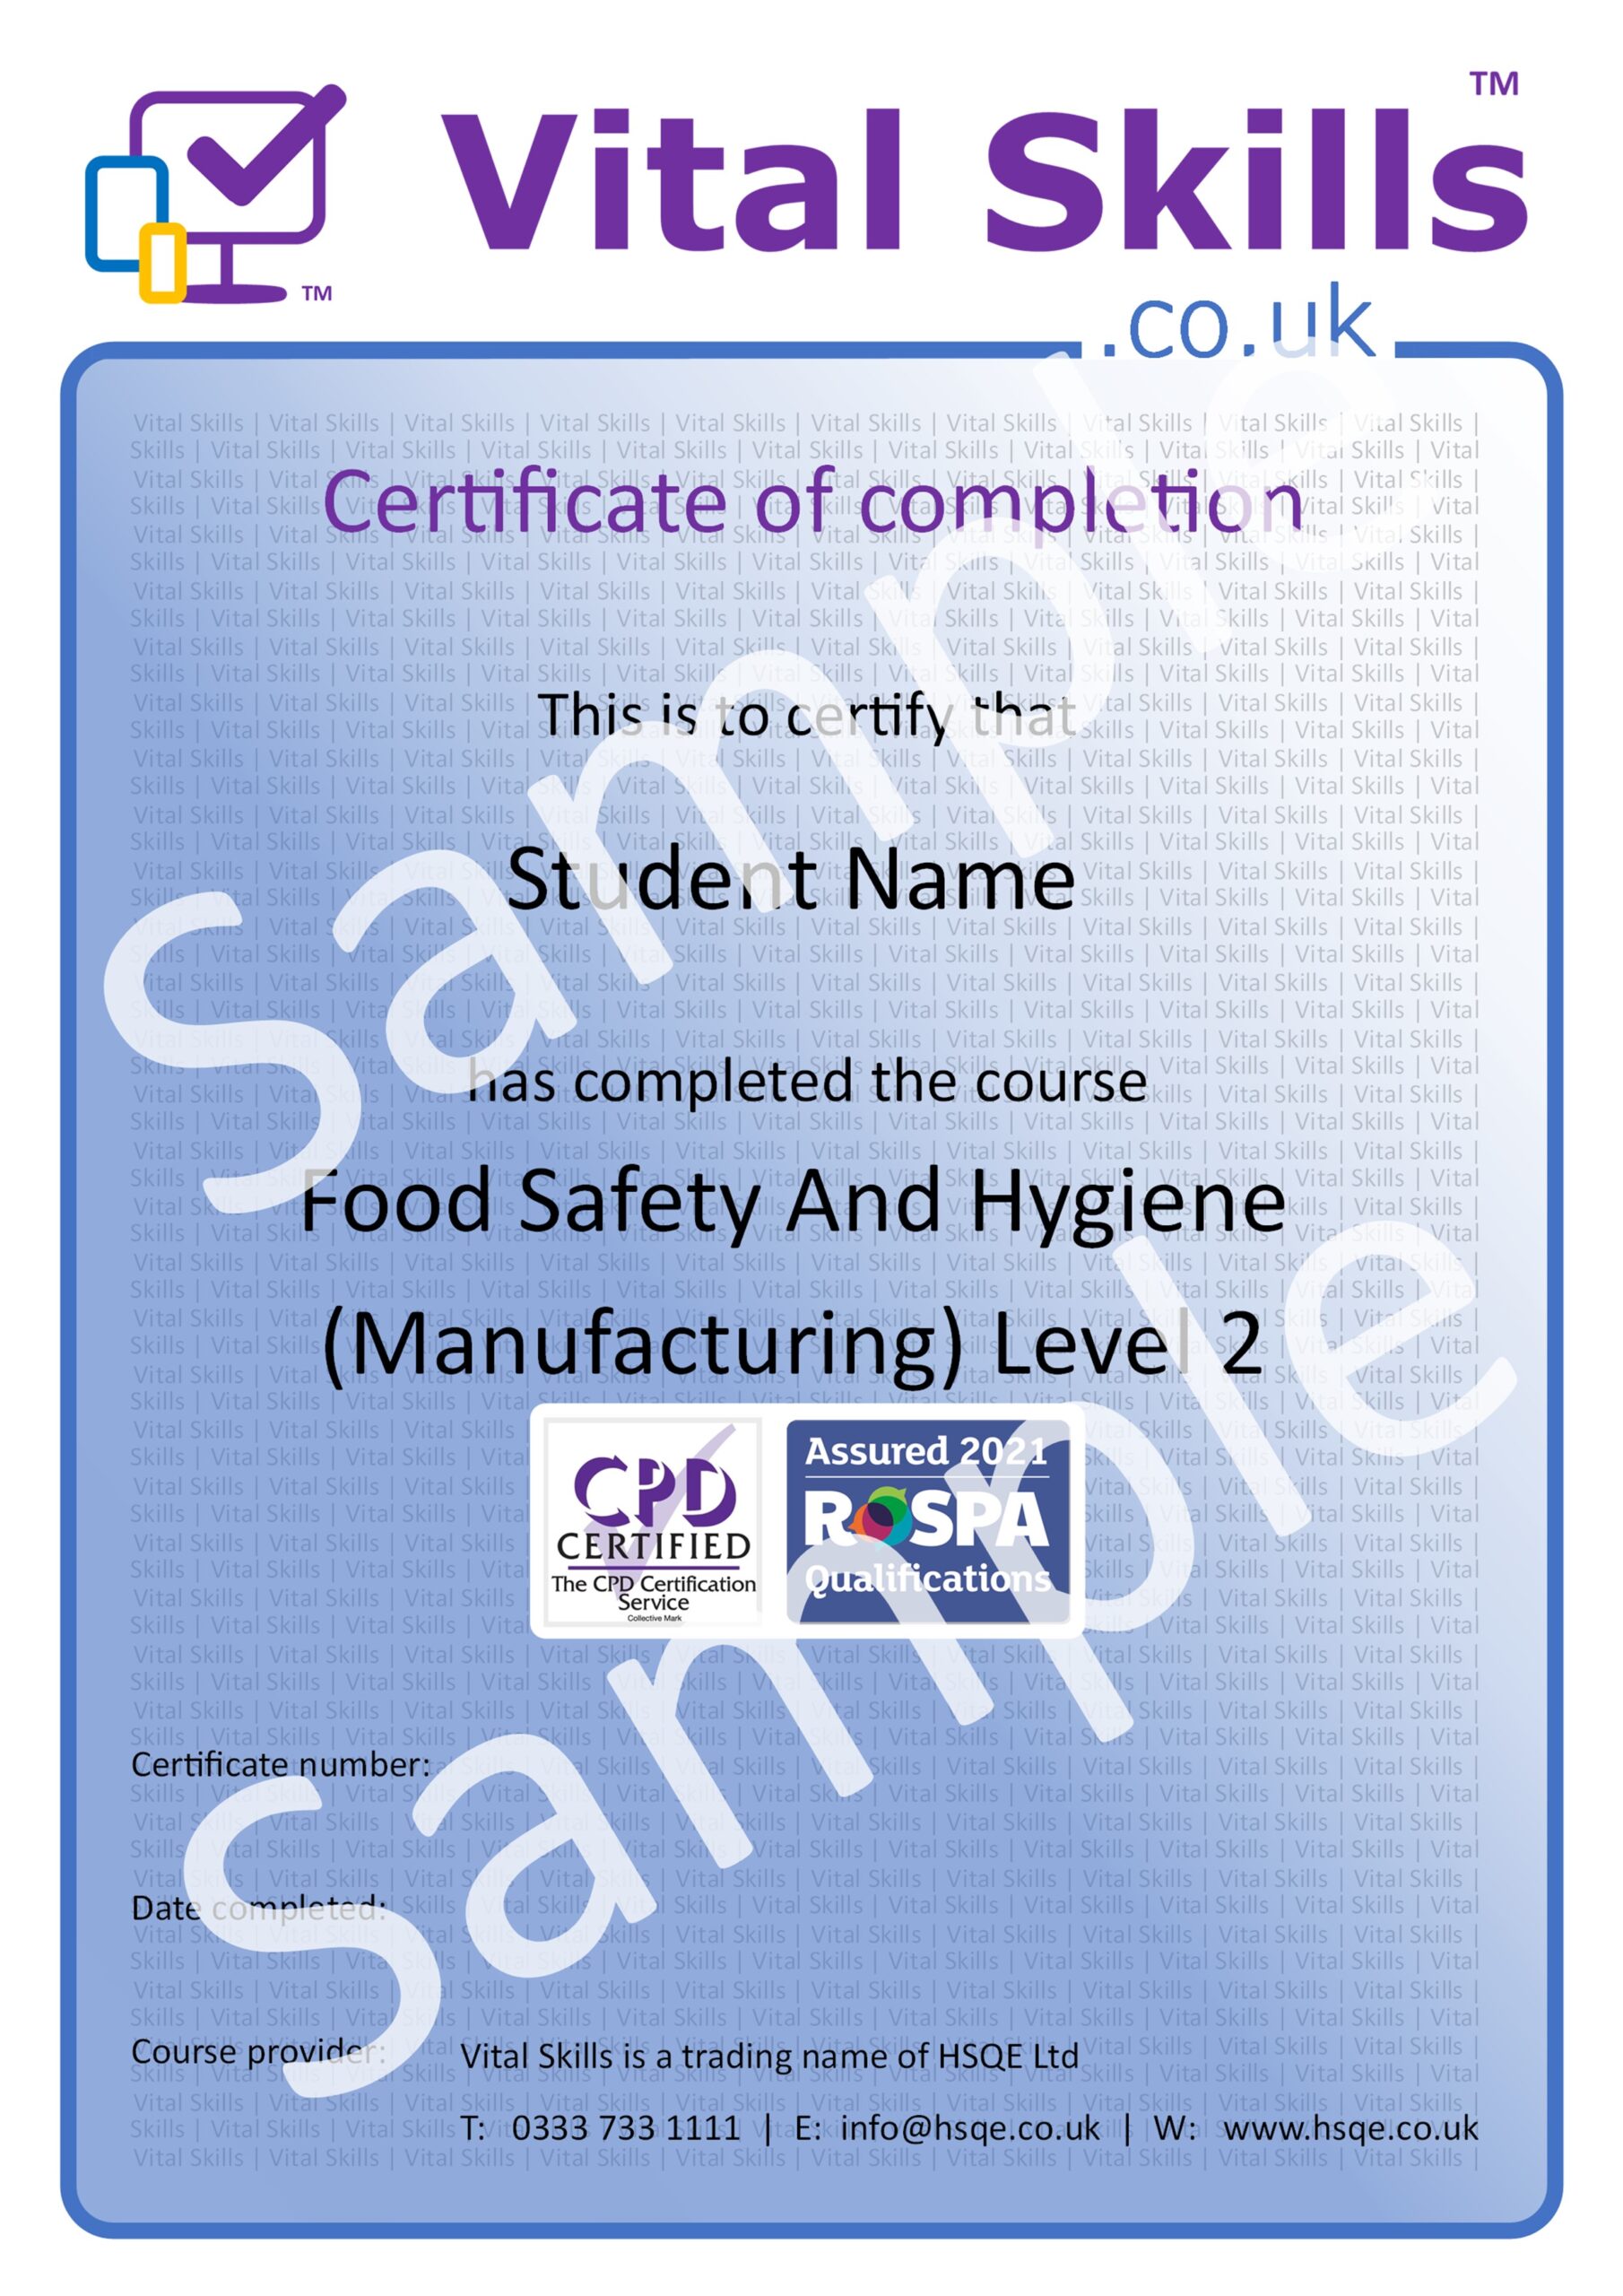 Food Safety And Hygiene Manufacturing Level 2 Online Training Course Certificate HSQE Vital Skills